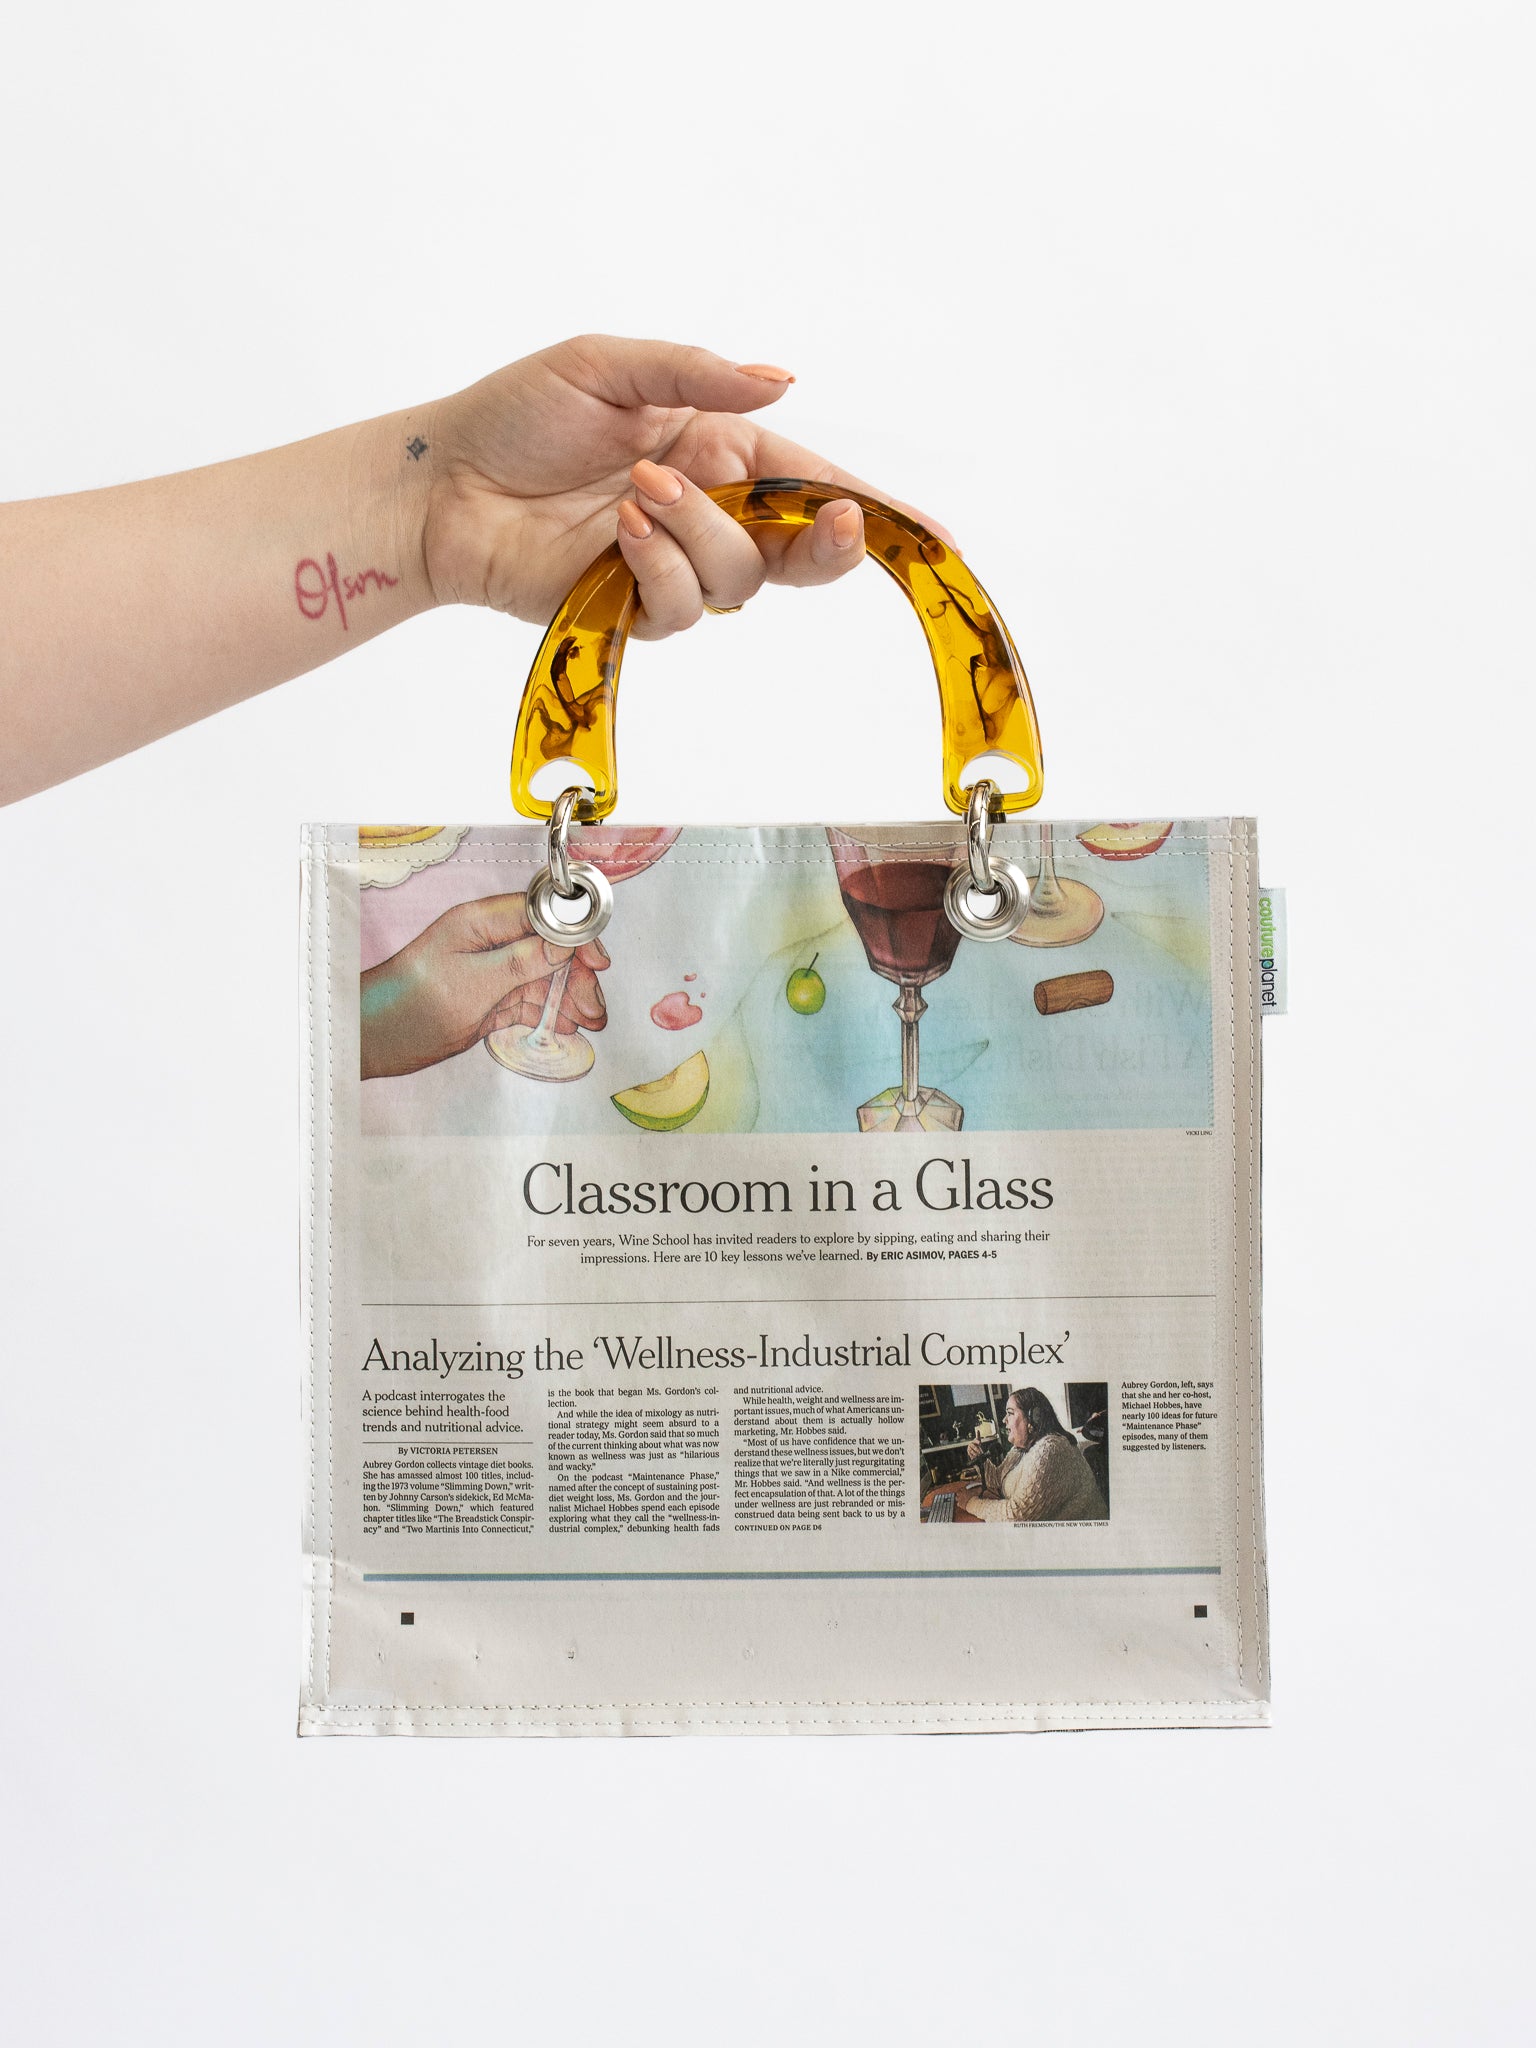 Couture Planet - “Food + Wine" Bag